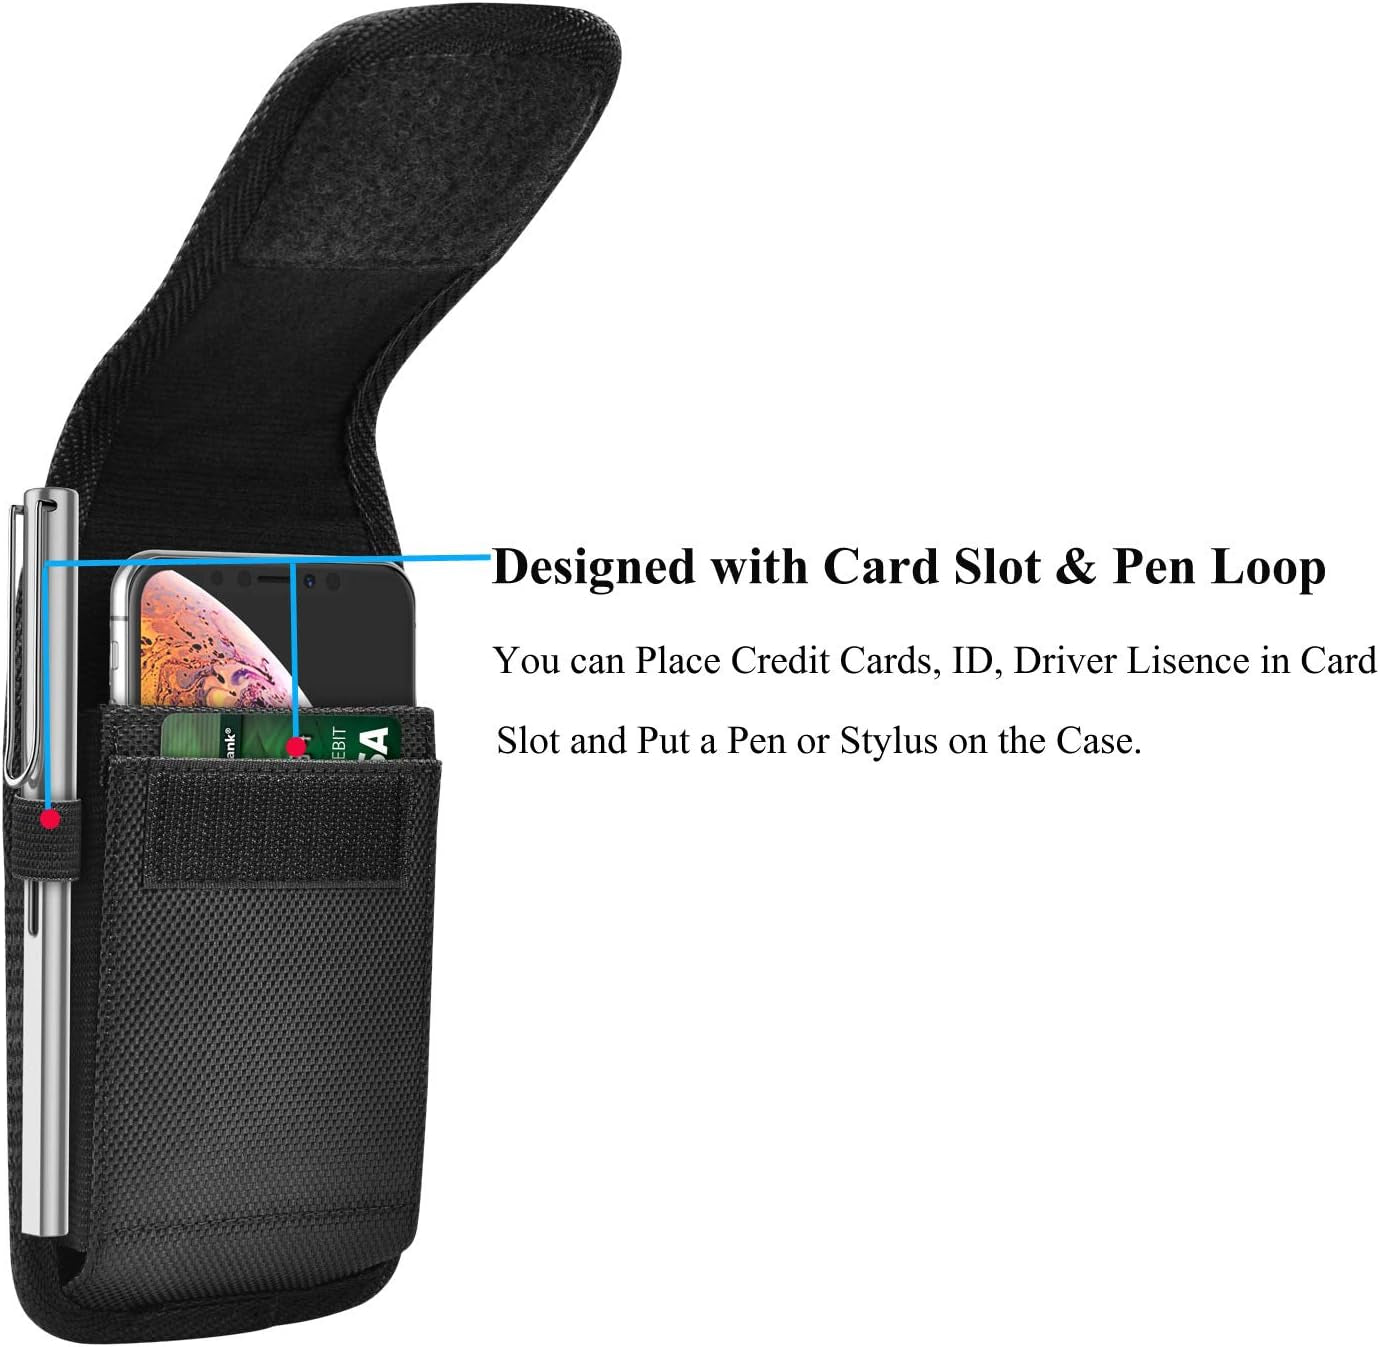 Cell Phone Holster for Iphone 13 14 Pro Max 12 11 XR 7 8 Samsung Galaxy S22 Ultra S21 S20 S10 S9 Note 20 10 A11 A21 A51 A71 A02S A12 A13 A32 A42 A52 Belt Clip Holster Phone Pouch Carrying Holder